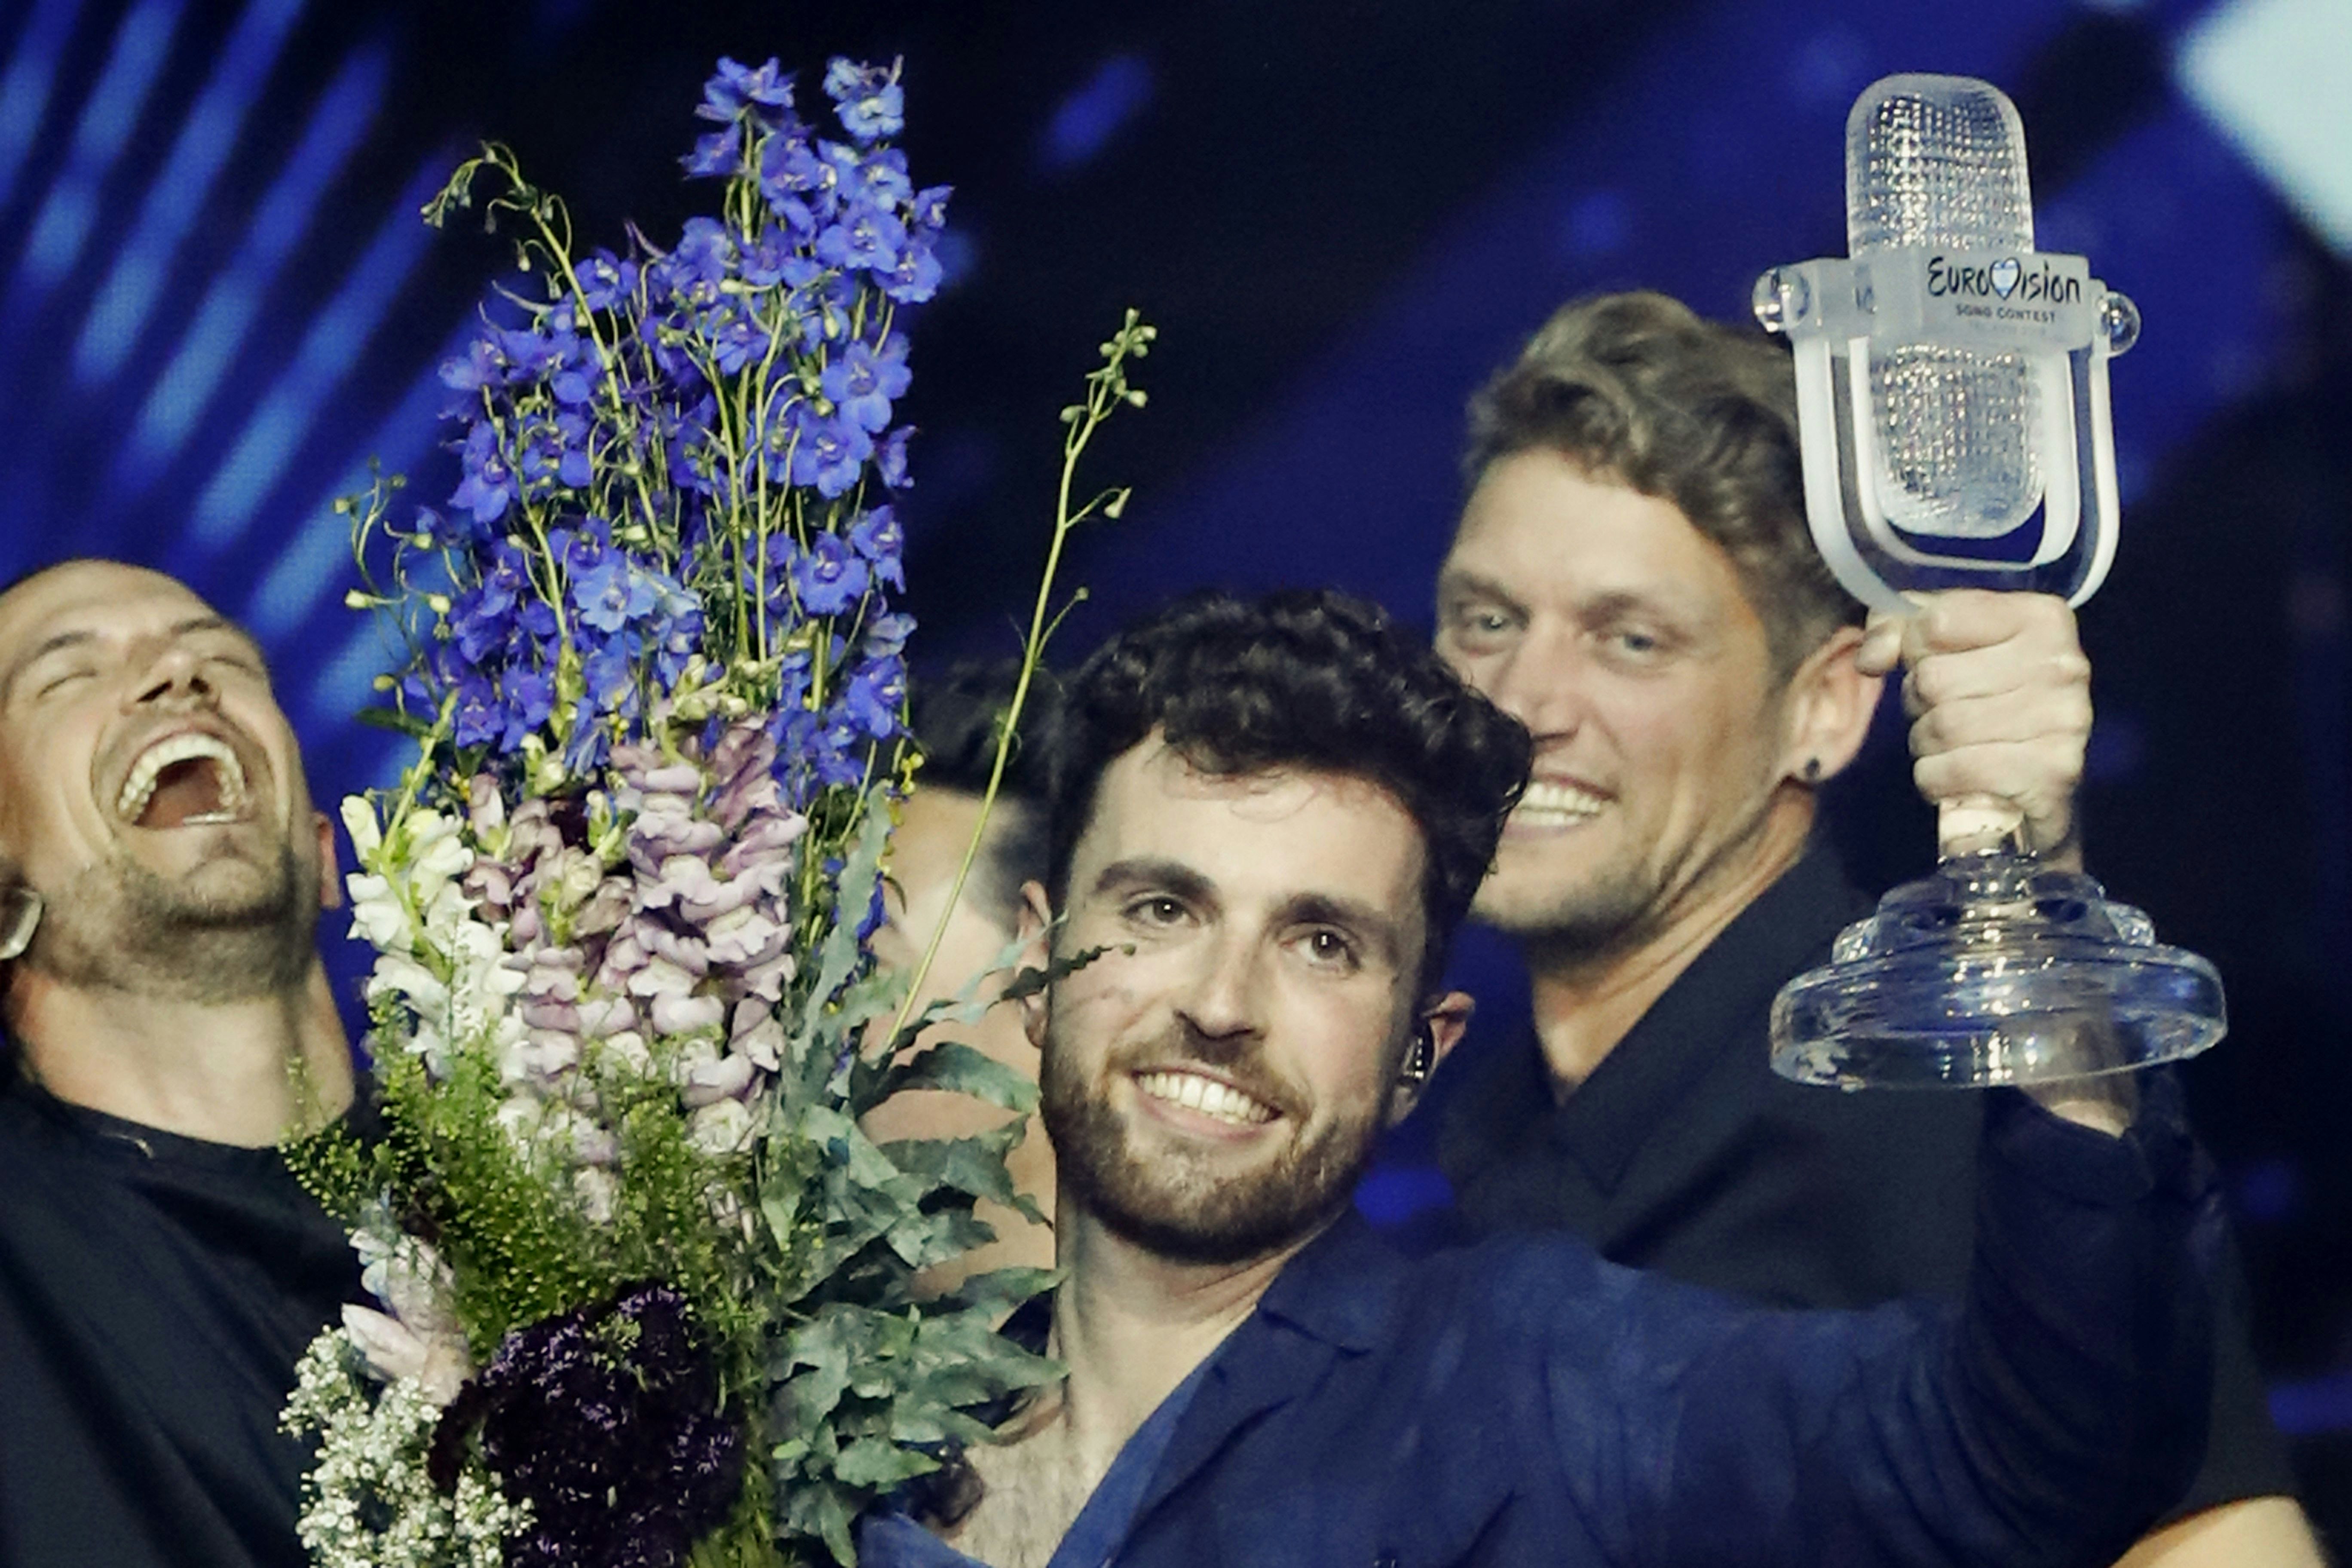 Winner of Eurovision 2019, Duncan Laurence holds up the glass microphone trophy in one hand and a bouquet of flowers in the other, as his entourage smile and laugh behind.